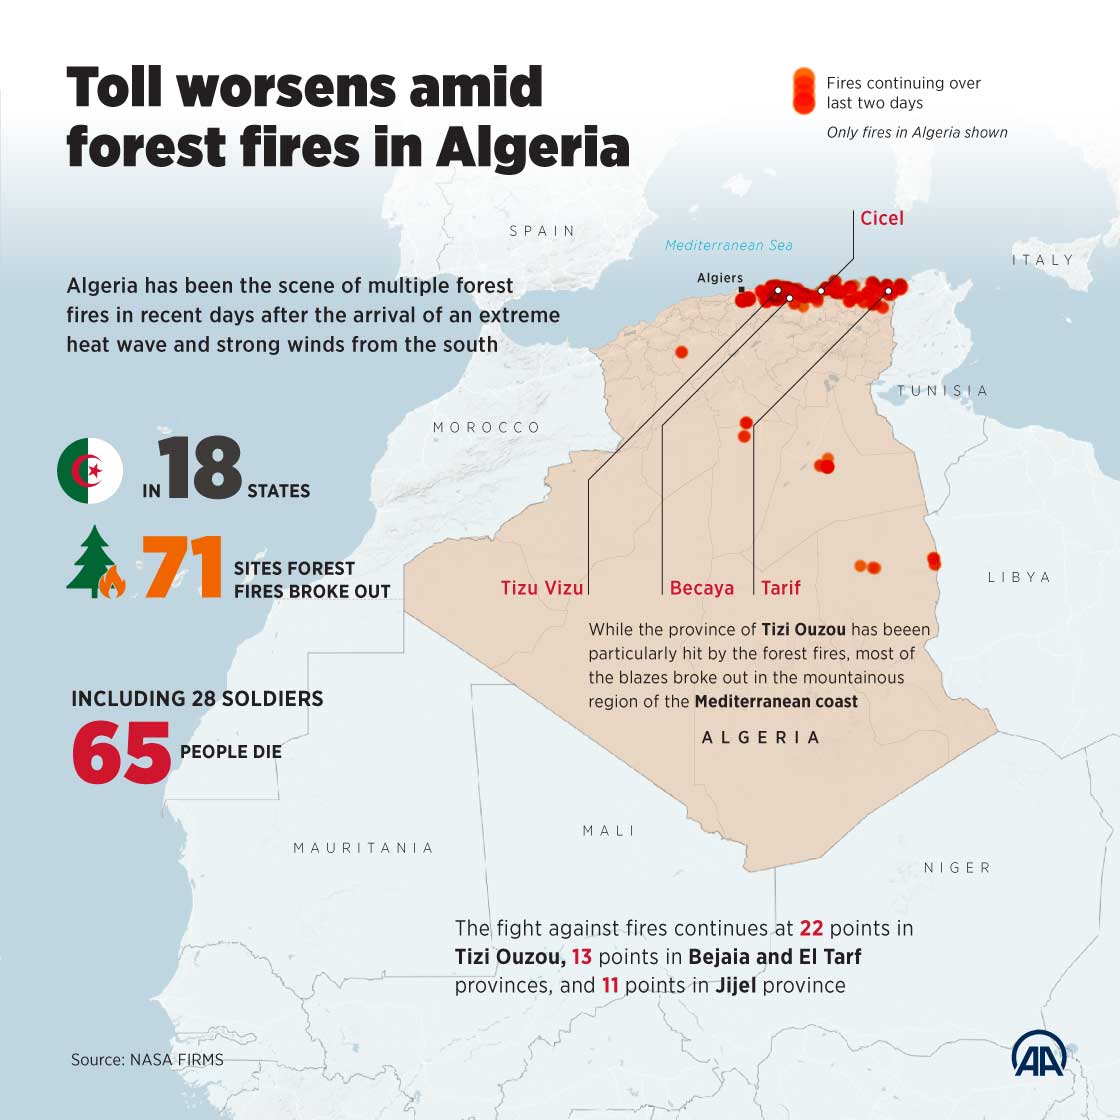 Toll worsens amid forest fires in Algeria